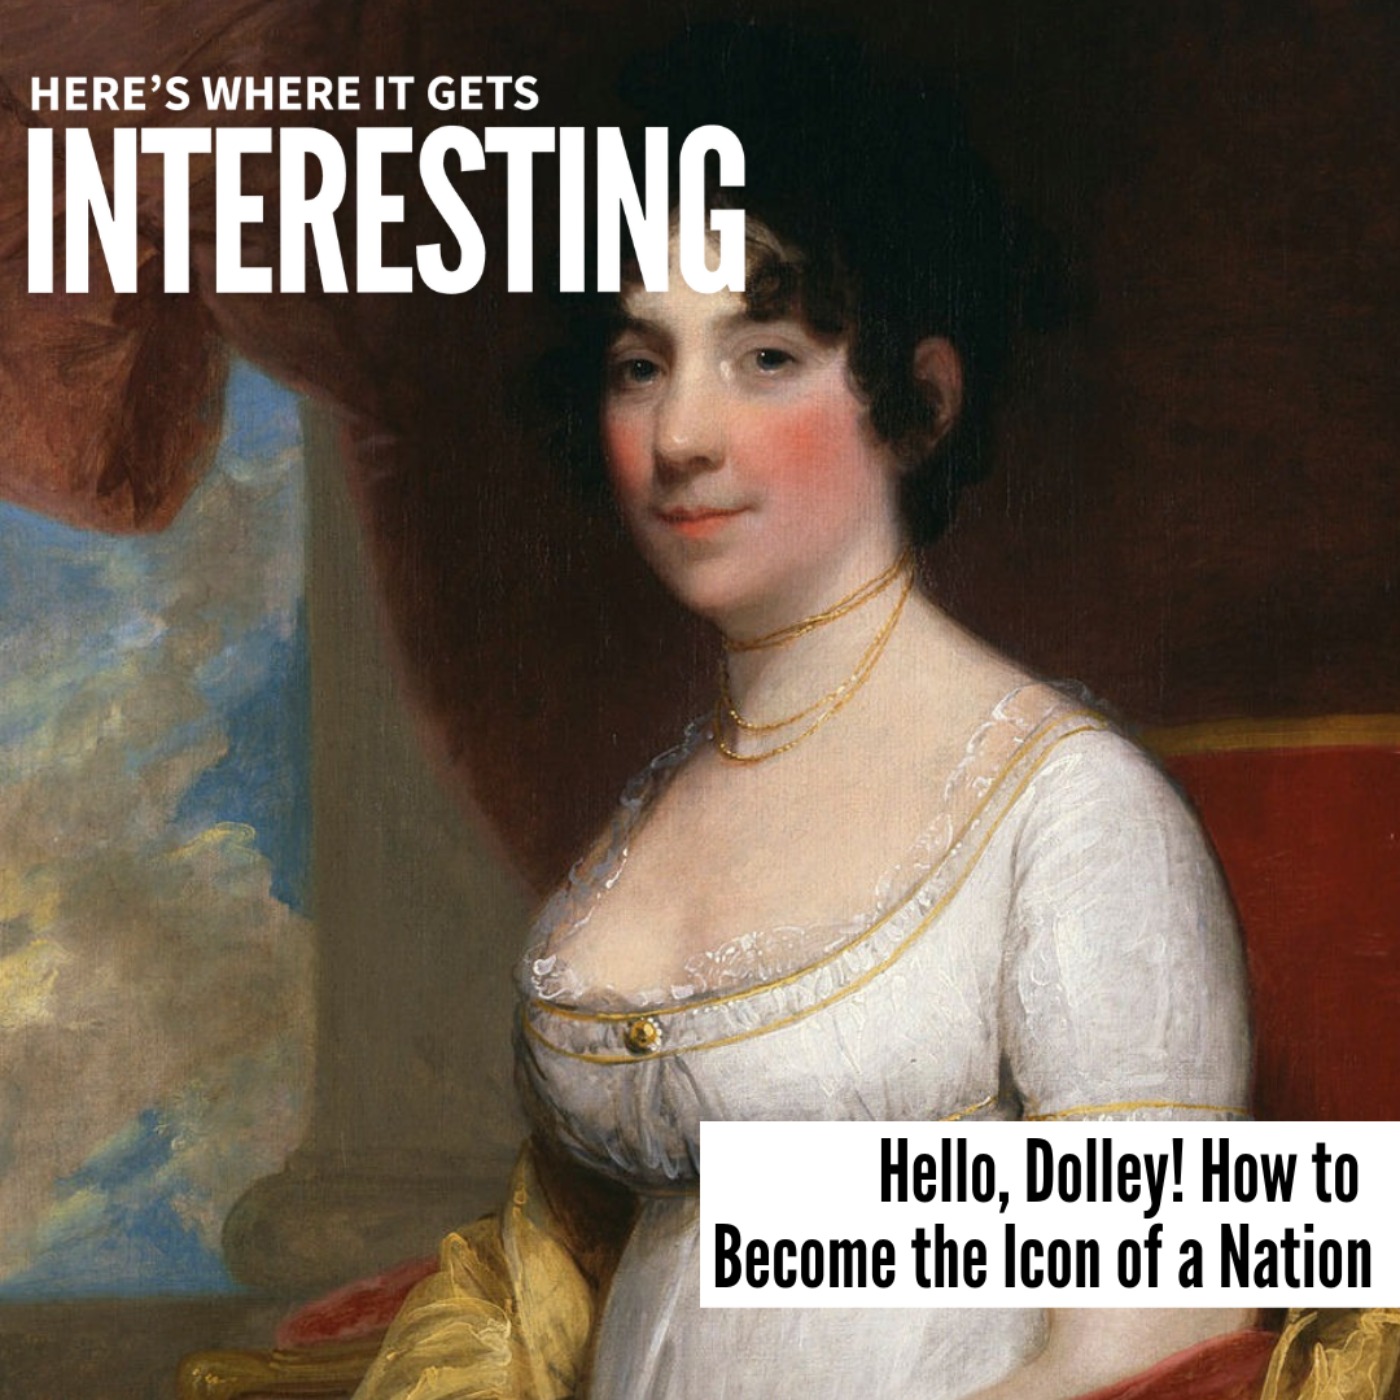 Hello, Dolley!: How to Become the Icon of a Nation